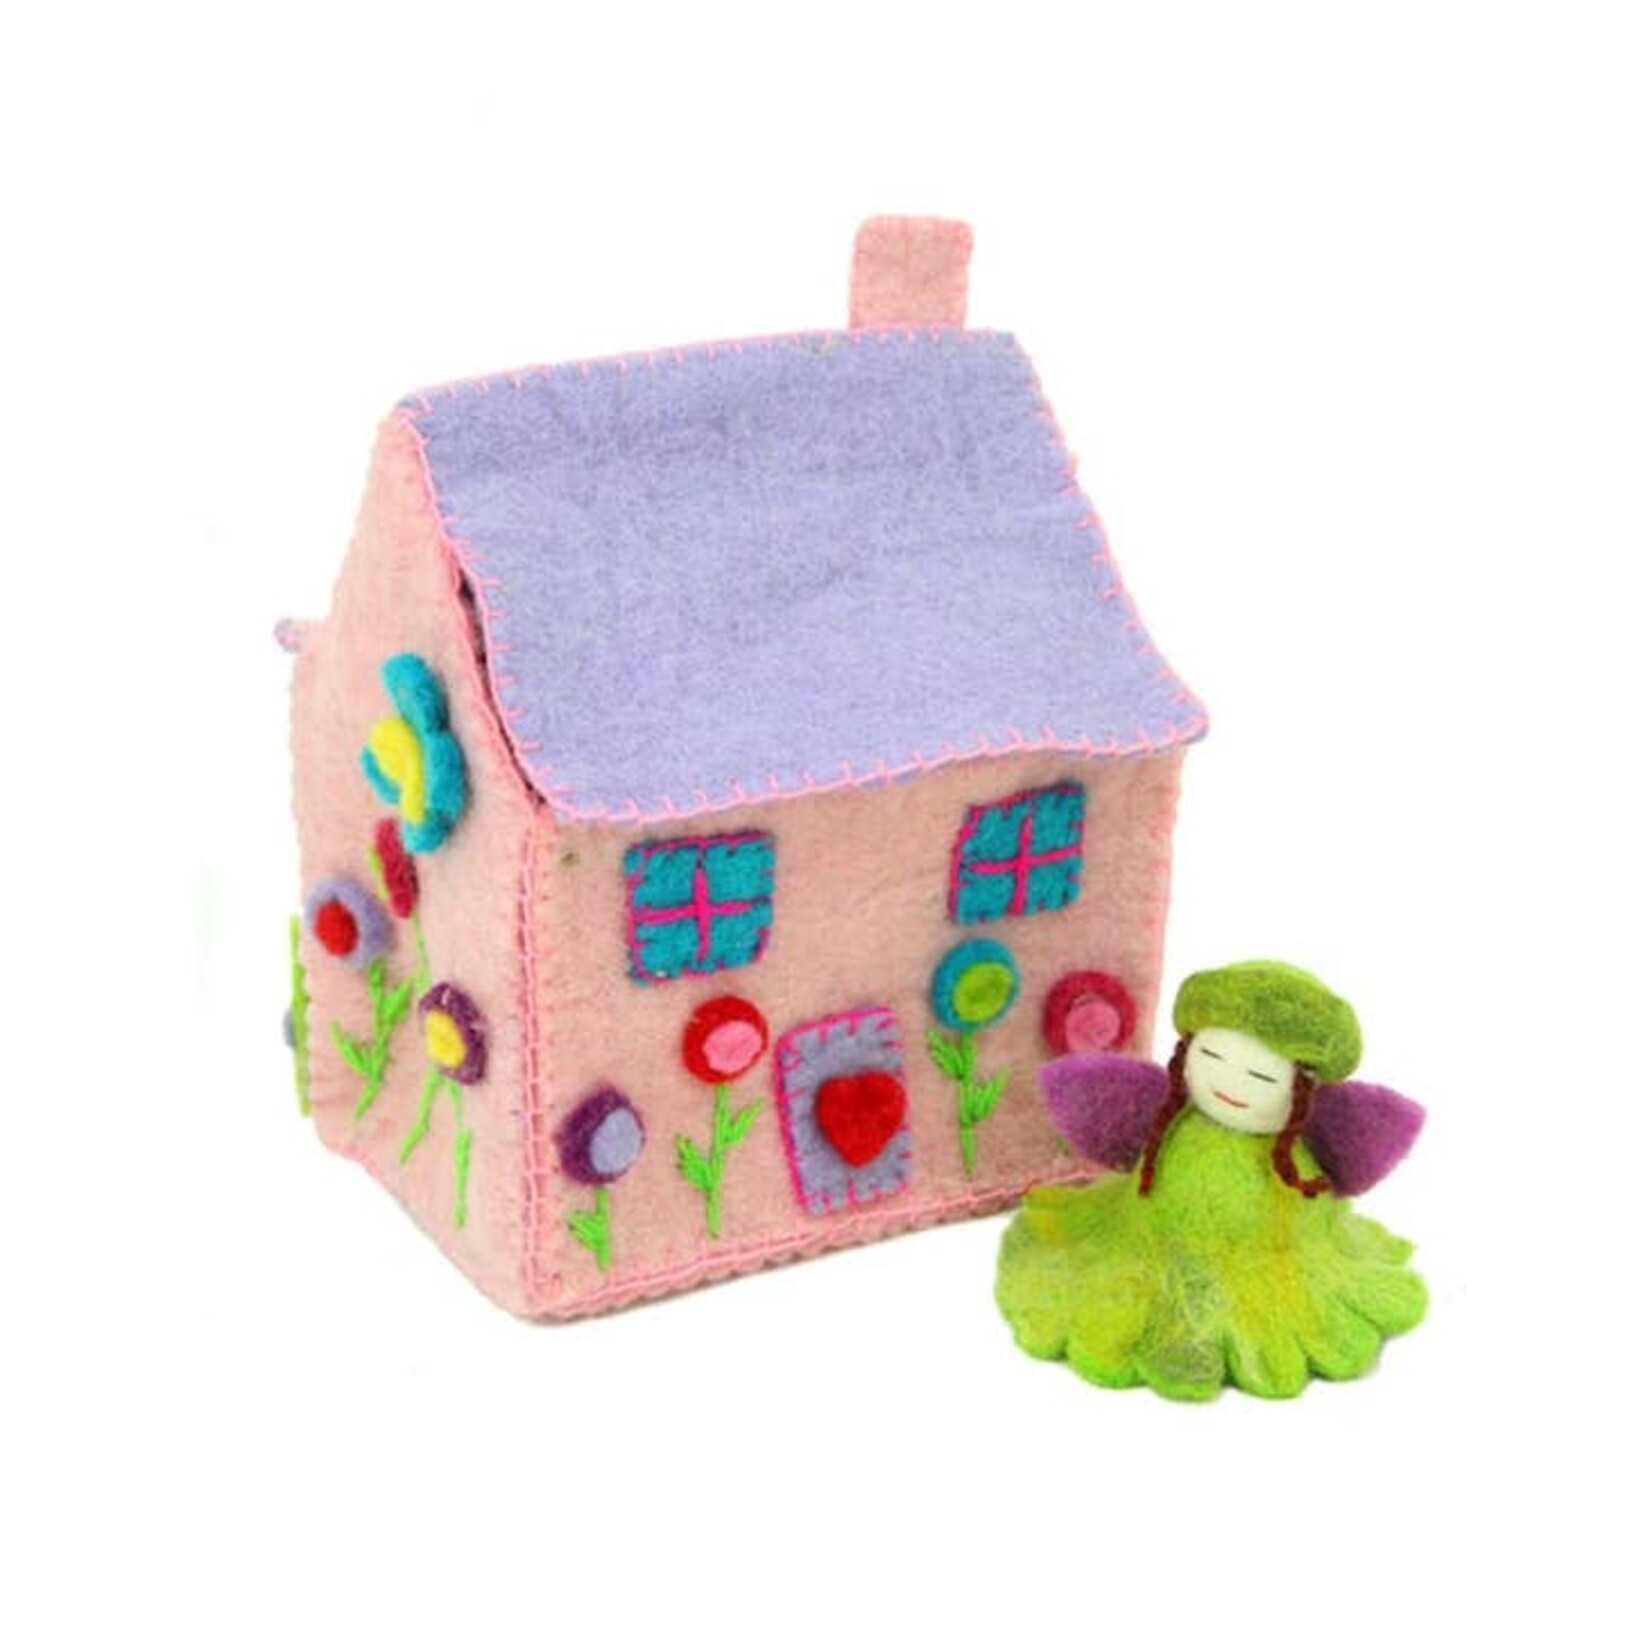 Global Crafts Handcrafted Pink Felt Fairy House, Nepal